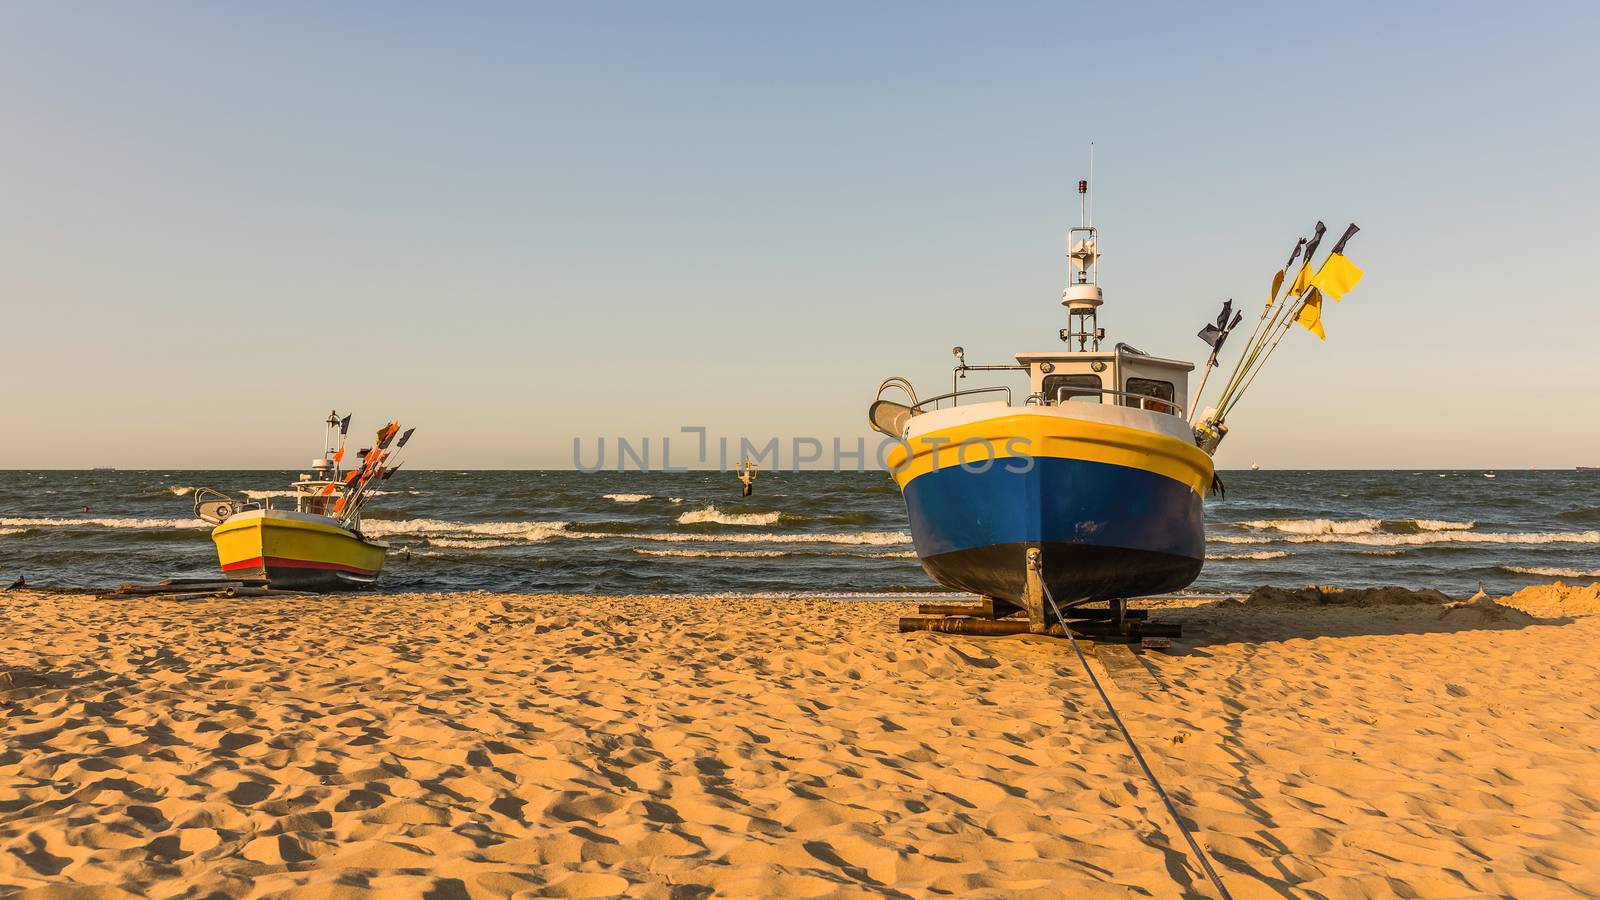 Fishing boats on a beach in Sopot, Poland.